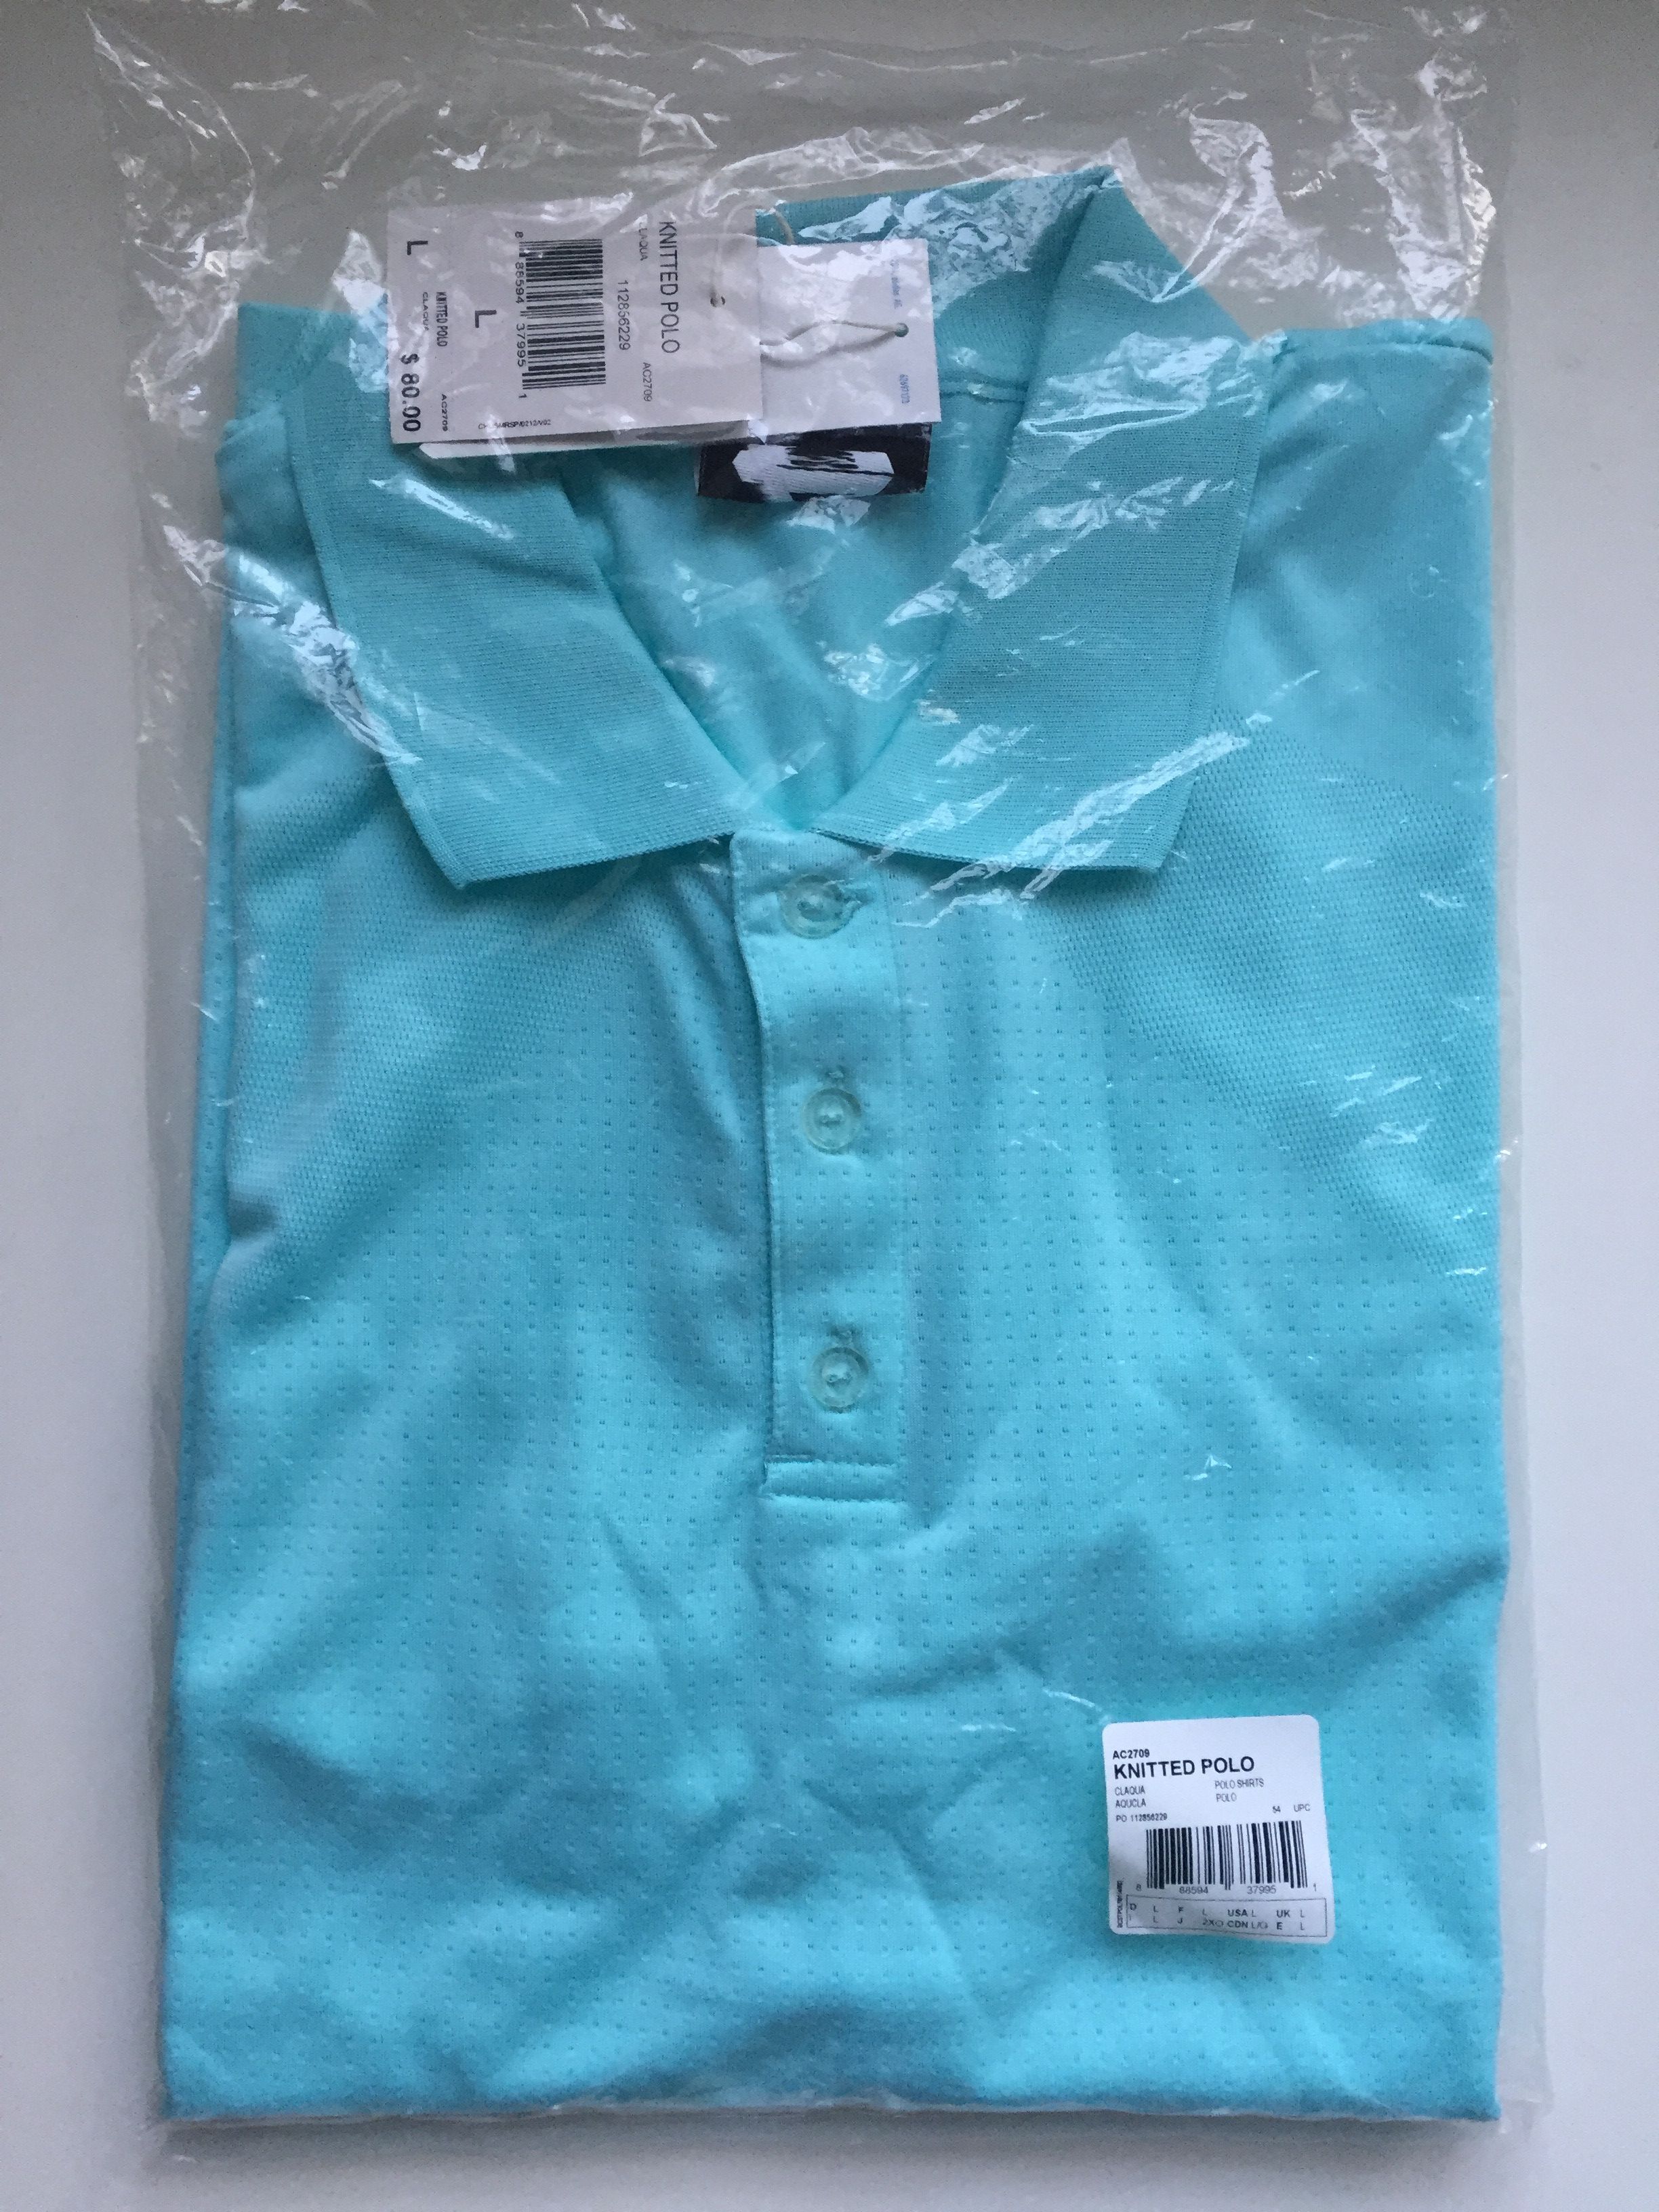 Adidas NEW Palace X Adidas Knitted Polo Aqua Large Size US L / EU 52-54 / 3 - 1 Preview